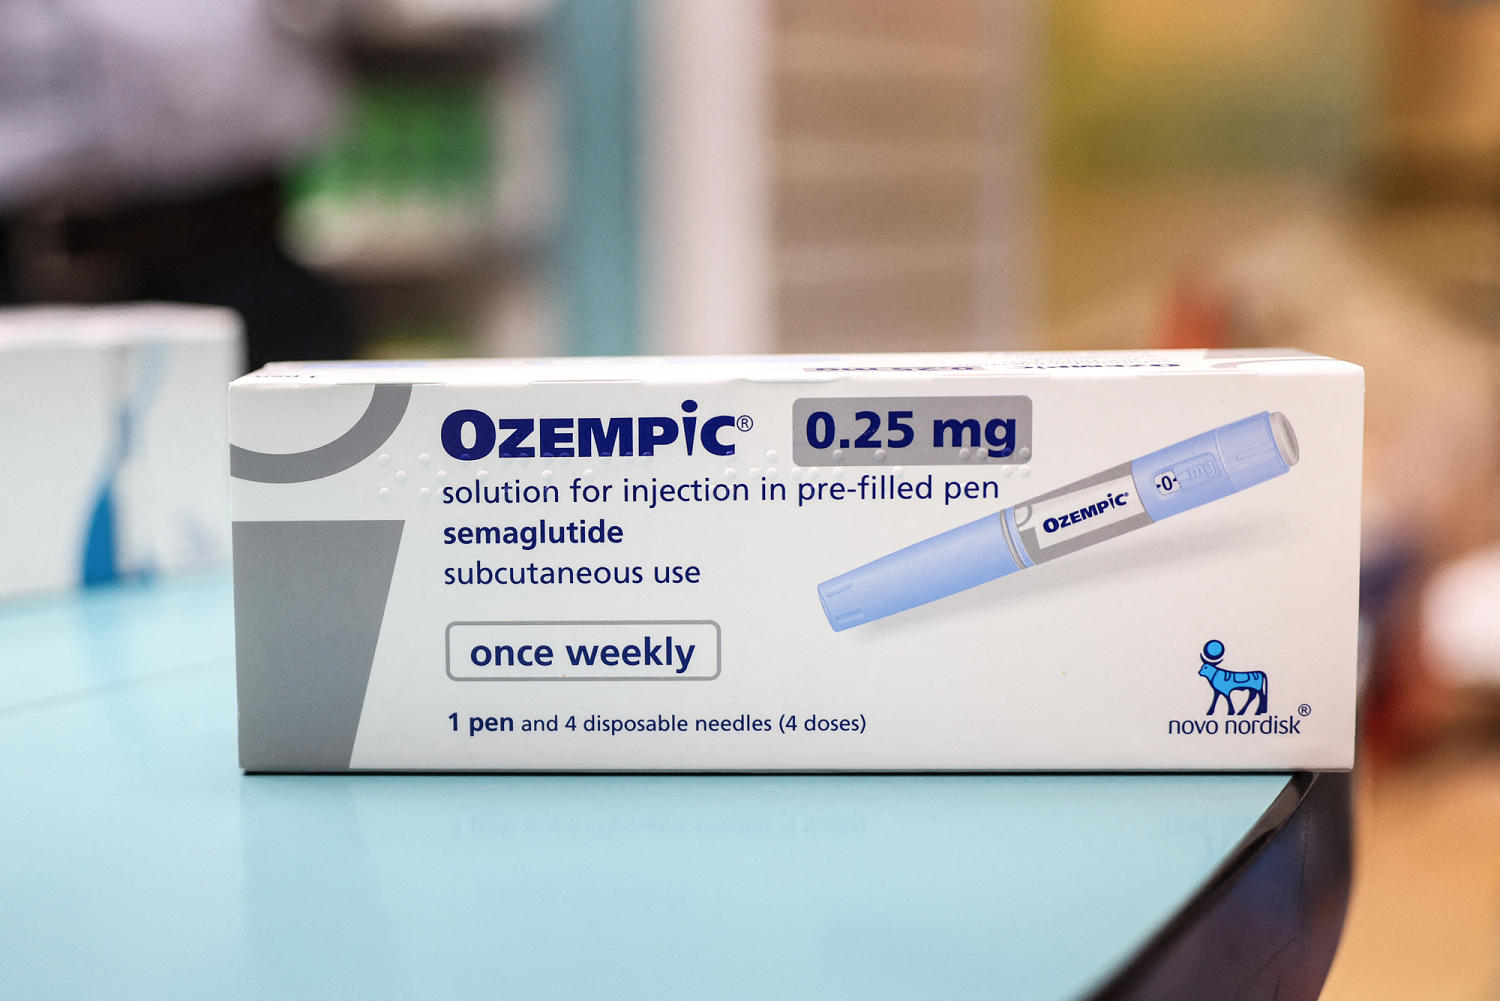 Ozempic may be linked to condition that causes blindness, but more research is needed